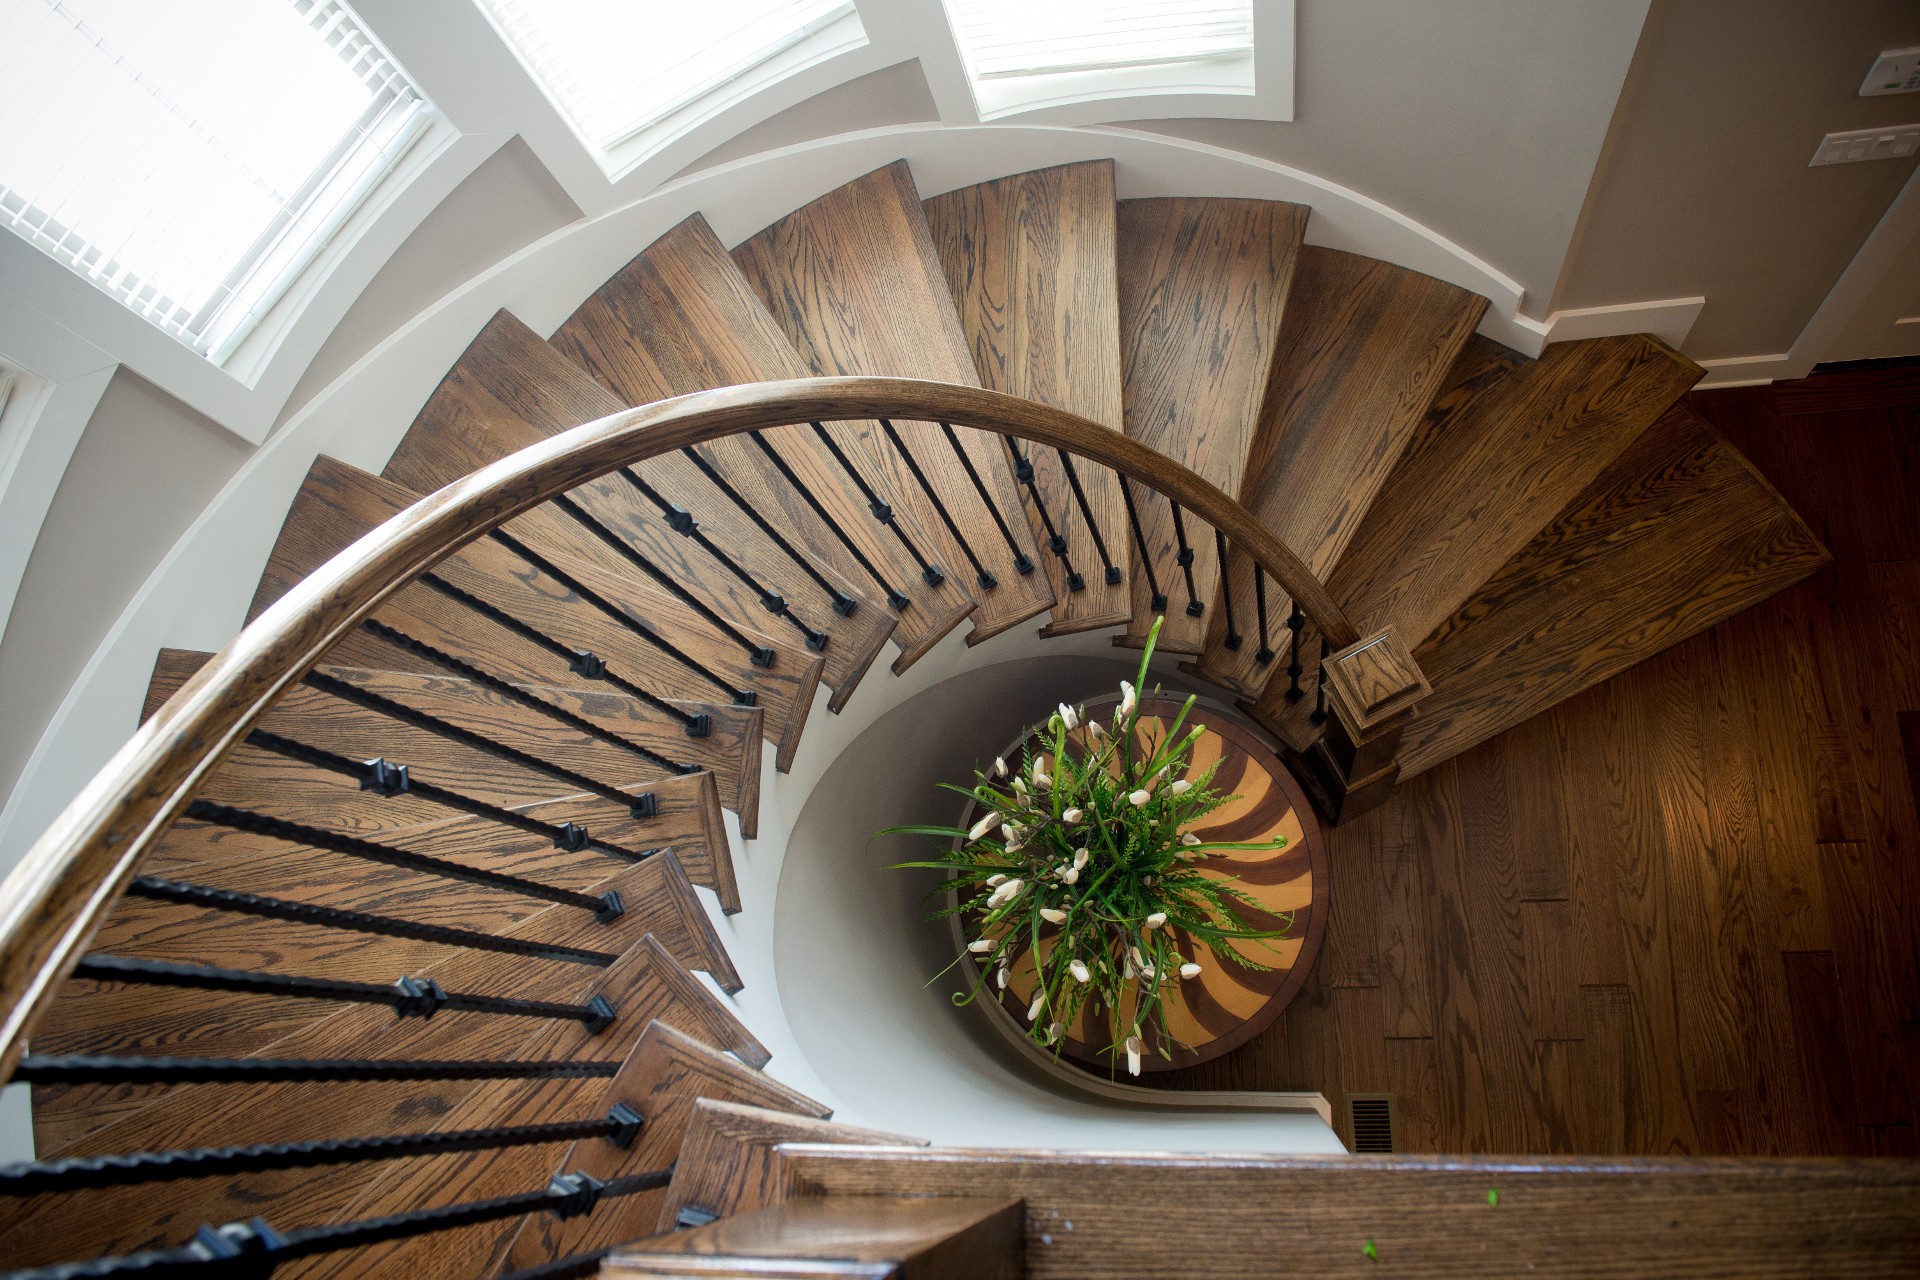 Stair Systems - Stairs, Stair Parts, Newels, Balusters and Railings ...